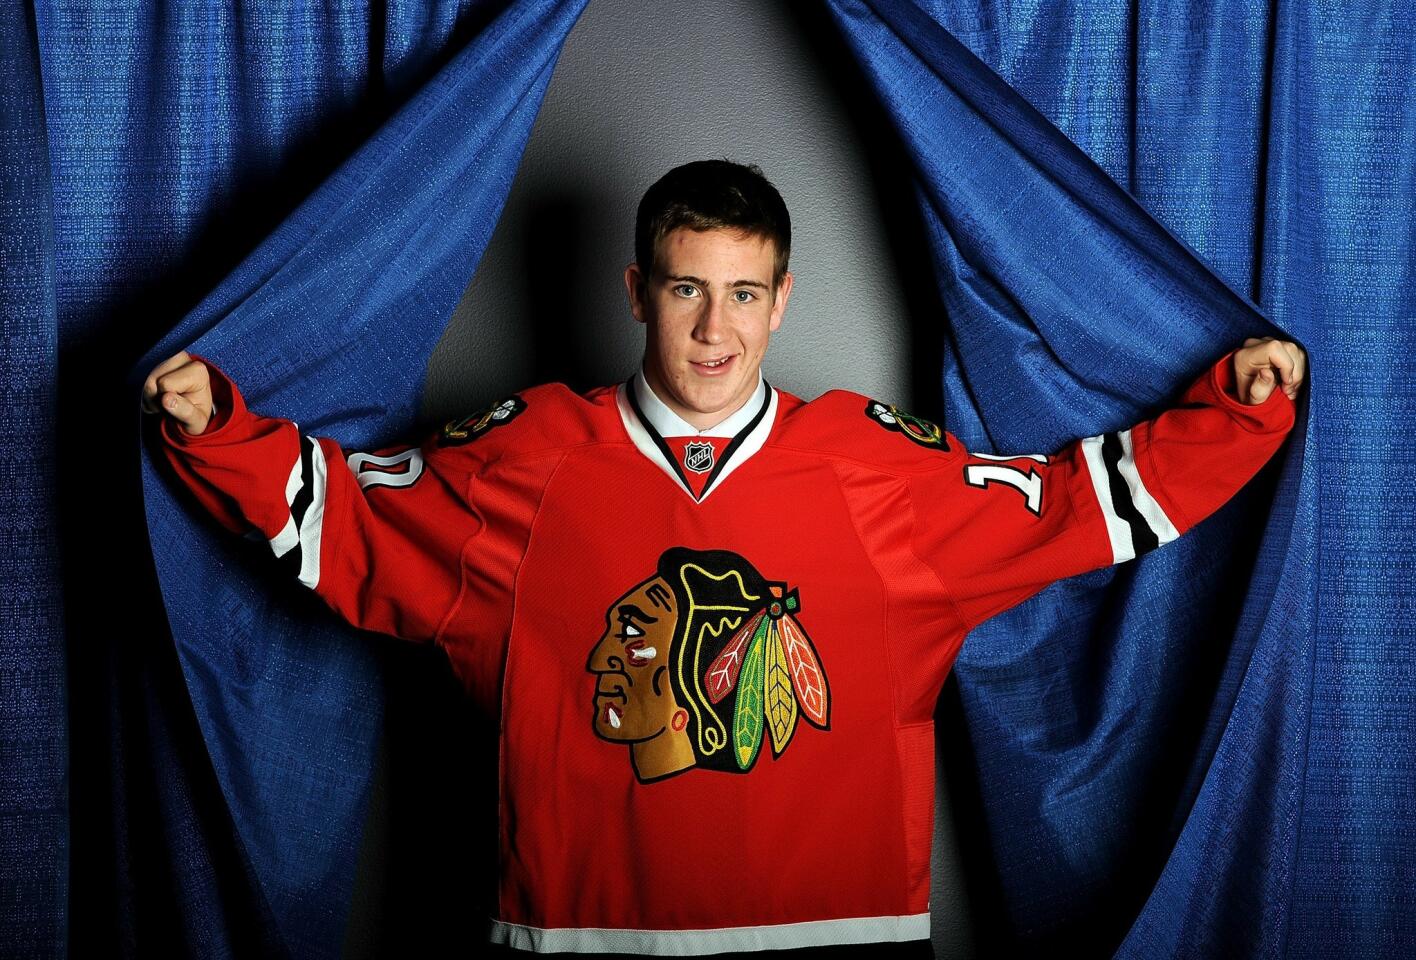 Never signed a contract with the Hawks before signing with the Rangers.